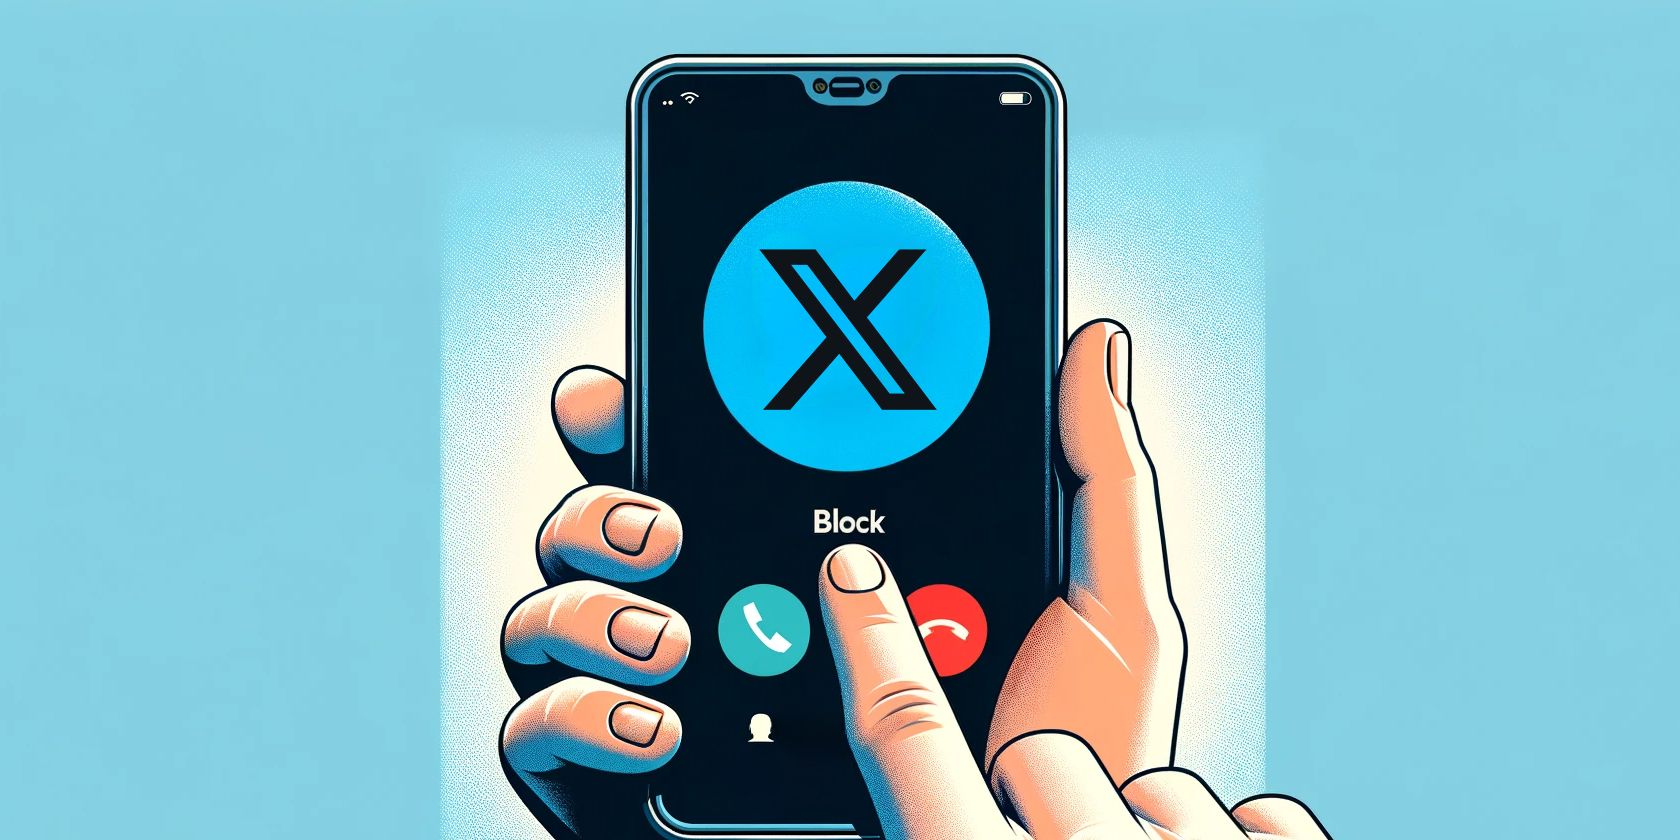 An animation style drawing showing someone blocking calling from social media platform X on their phone.